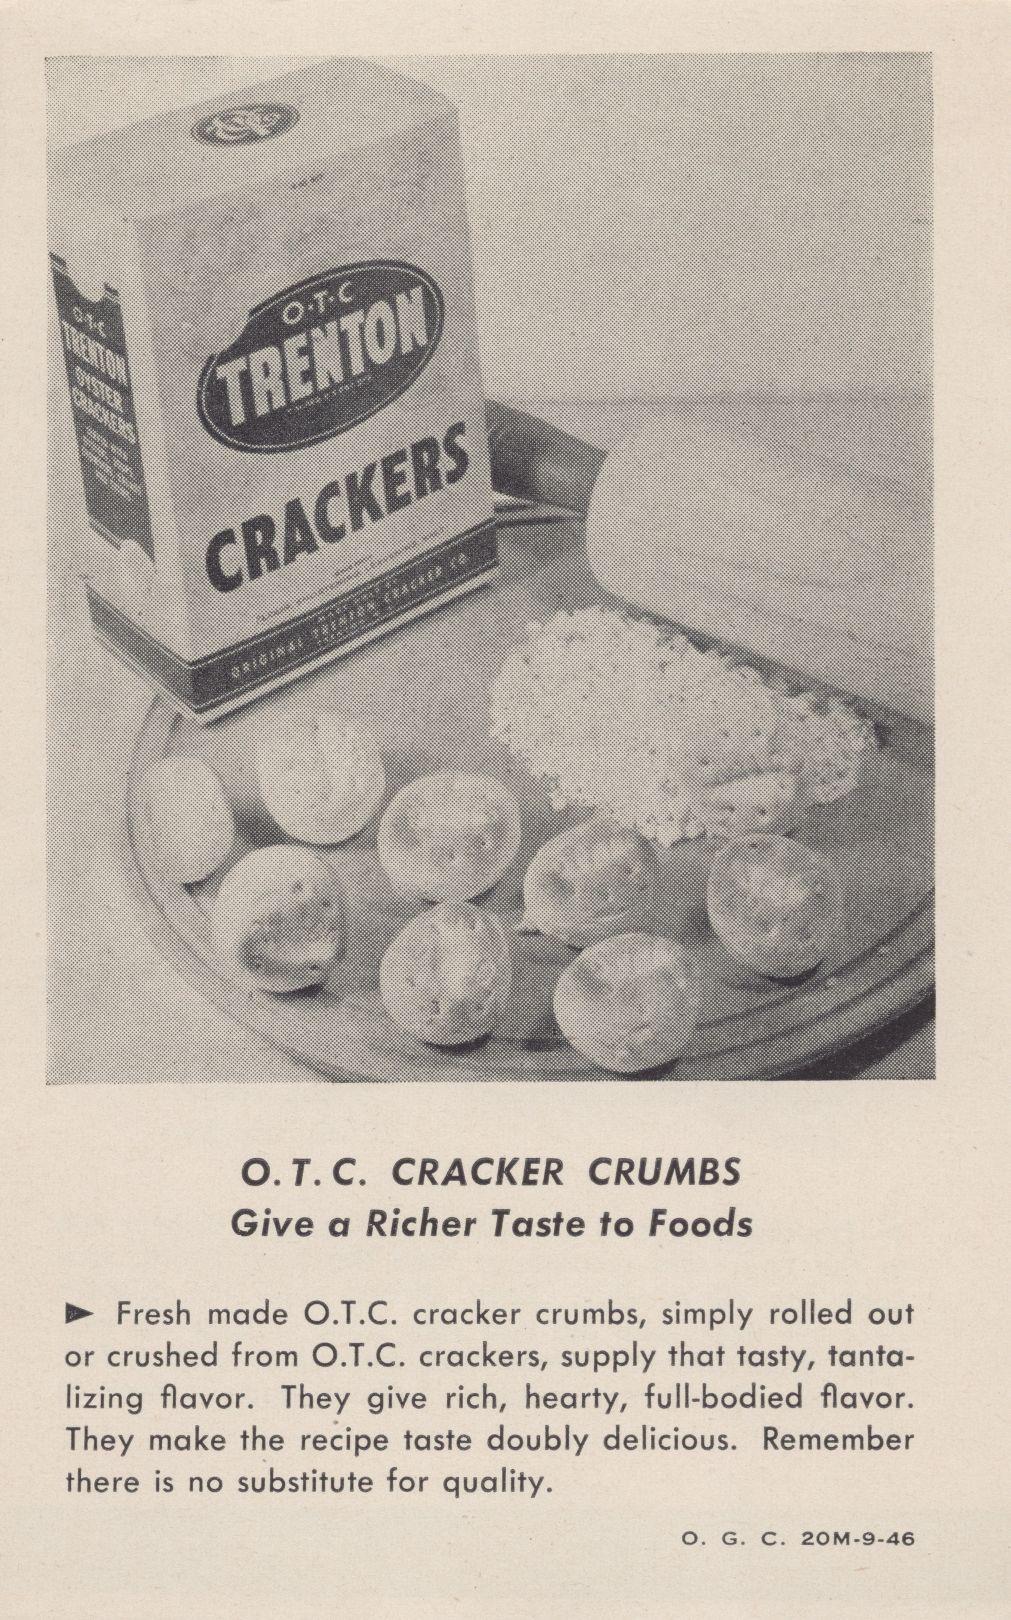 O.T.C. CRACKER CRUMBS Give a Richer Taste to Foods Fresh made O.T.C. cracker crumbs, simply rolled out or crushed from O.T.C. crackers, supply that tasty, tantalizing flavor.